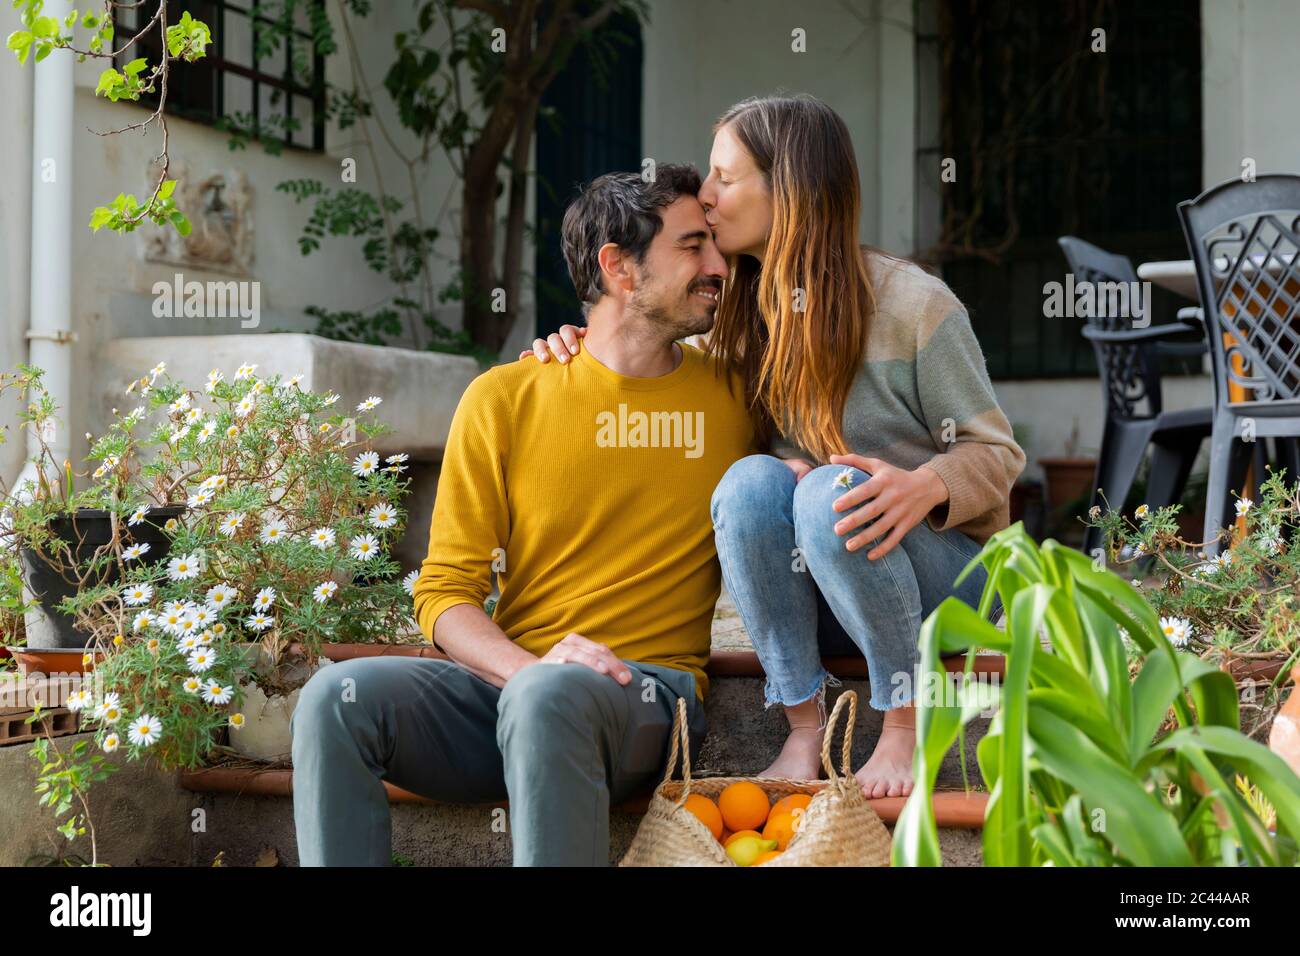 Romantic woman kissing on boyfriend's forehead while sitting over steps against farmhouse Stock Photo